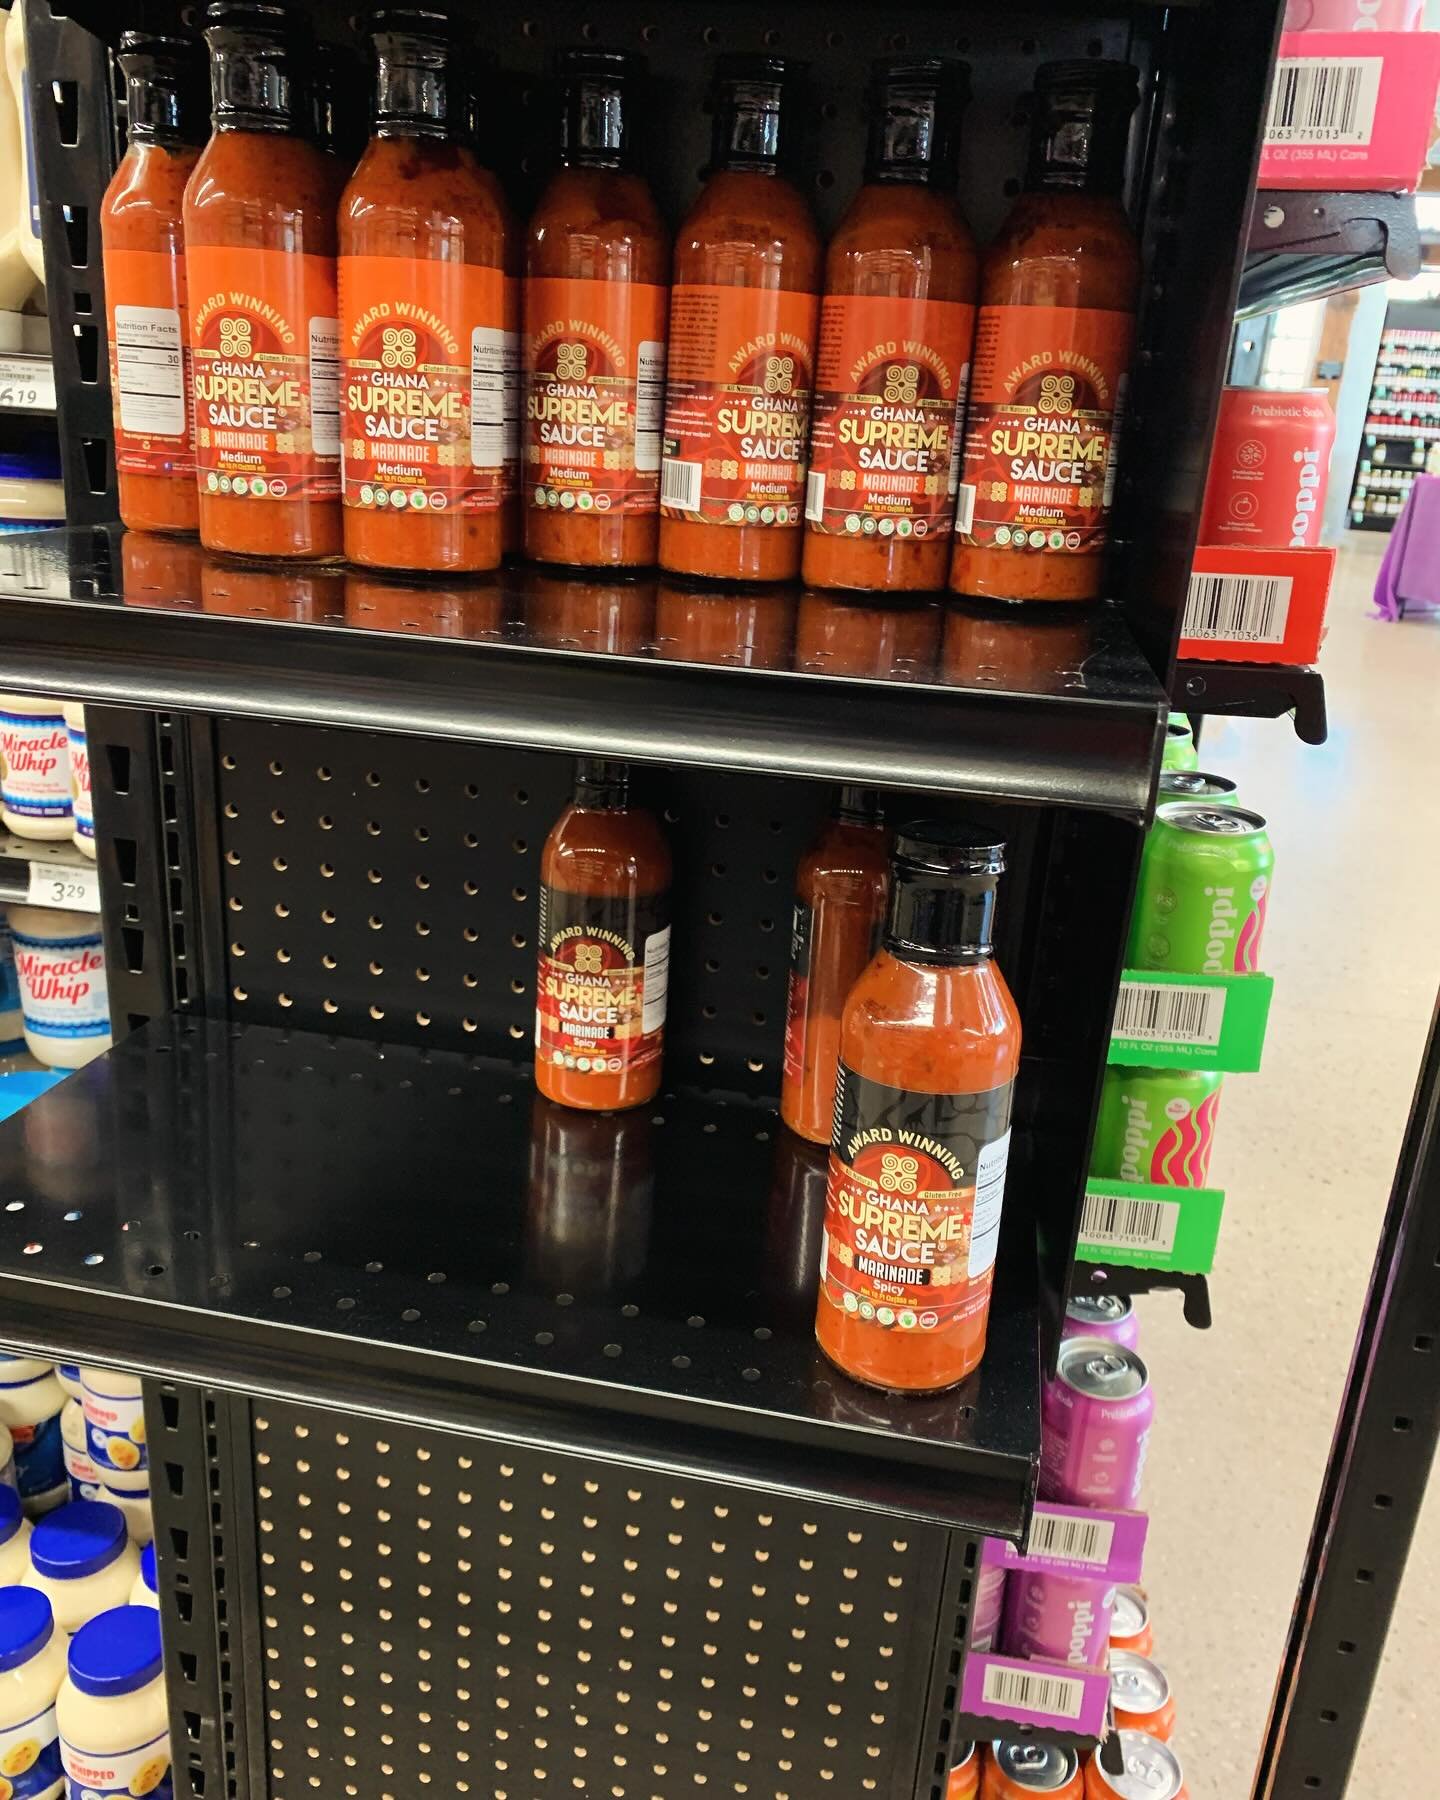 Yesterday the Spicy 🌶️ Ghana Supreme Sauce was flying off the shelves during our demo at @fairfaxmkt like hot cakes 🧁 🧁.

We understand why 😃 

Don&rsquo;t forget to stop by @fairfaxmkt to shop with us for only $4.99. 
.
.
.
www.micahspecialtyfoo